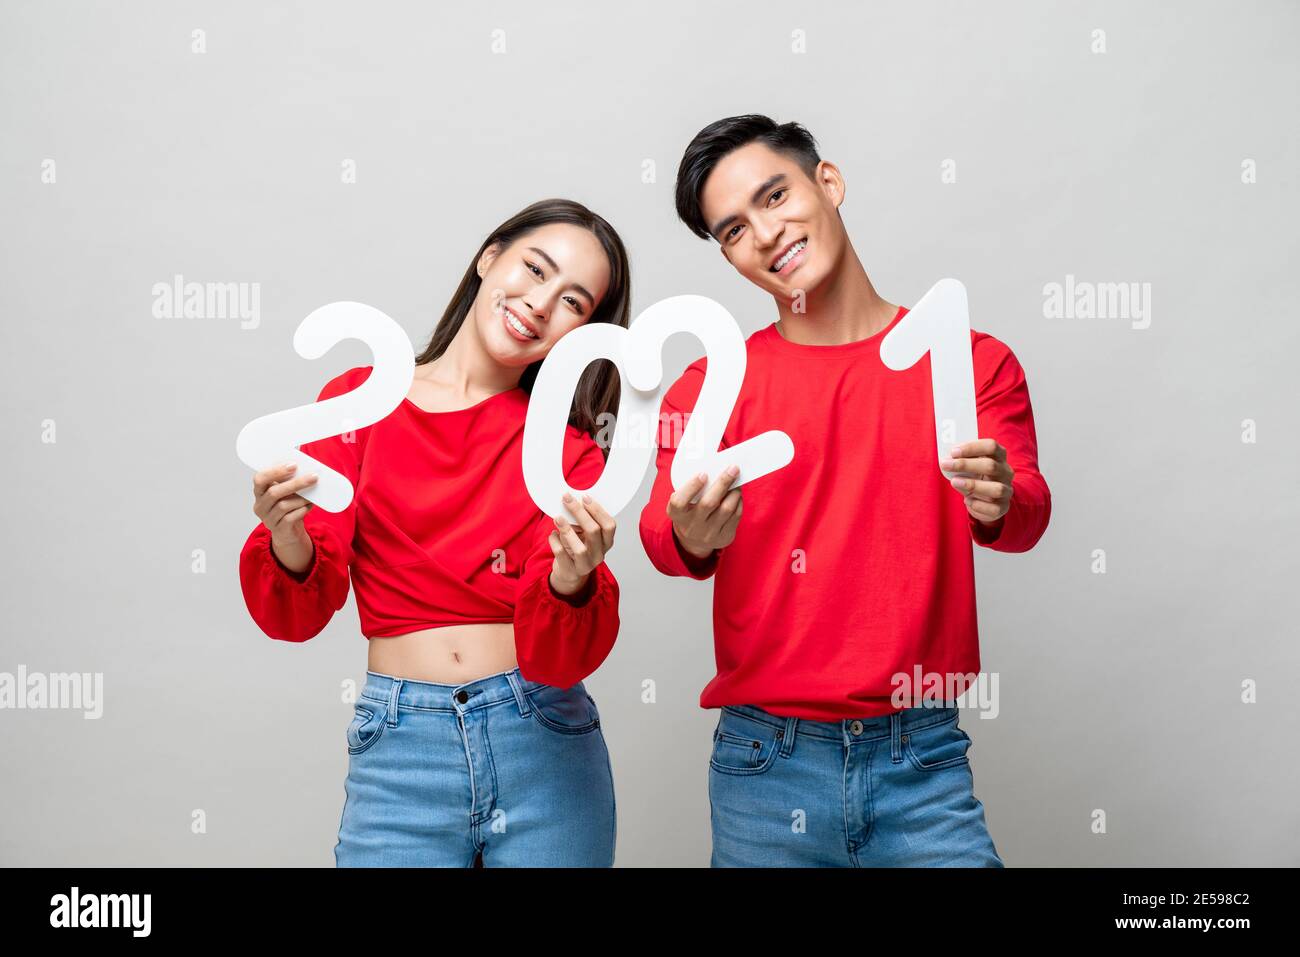 Happy cute Asian couple smiling and showing number 2021 for new year concept on light gray studio background Stock Photo